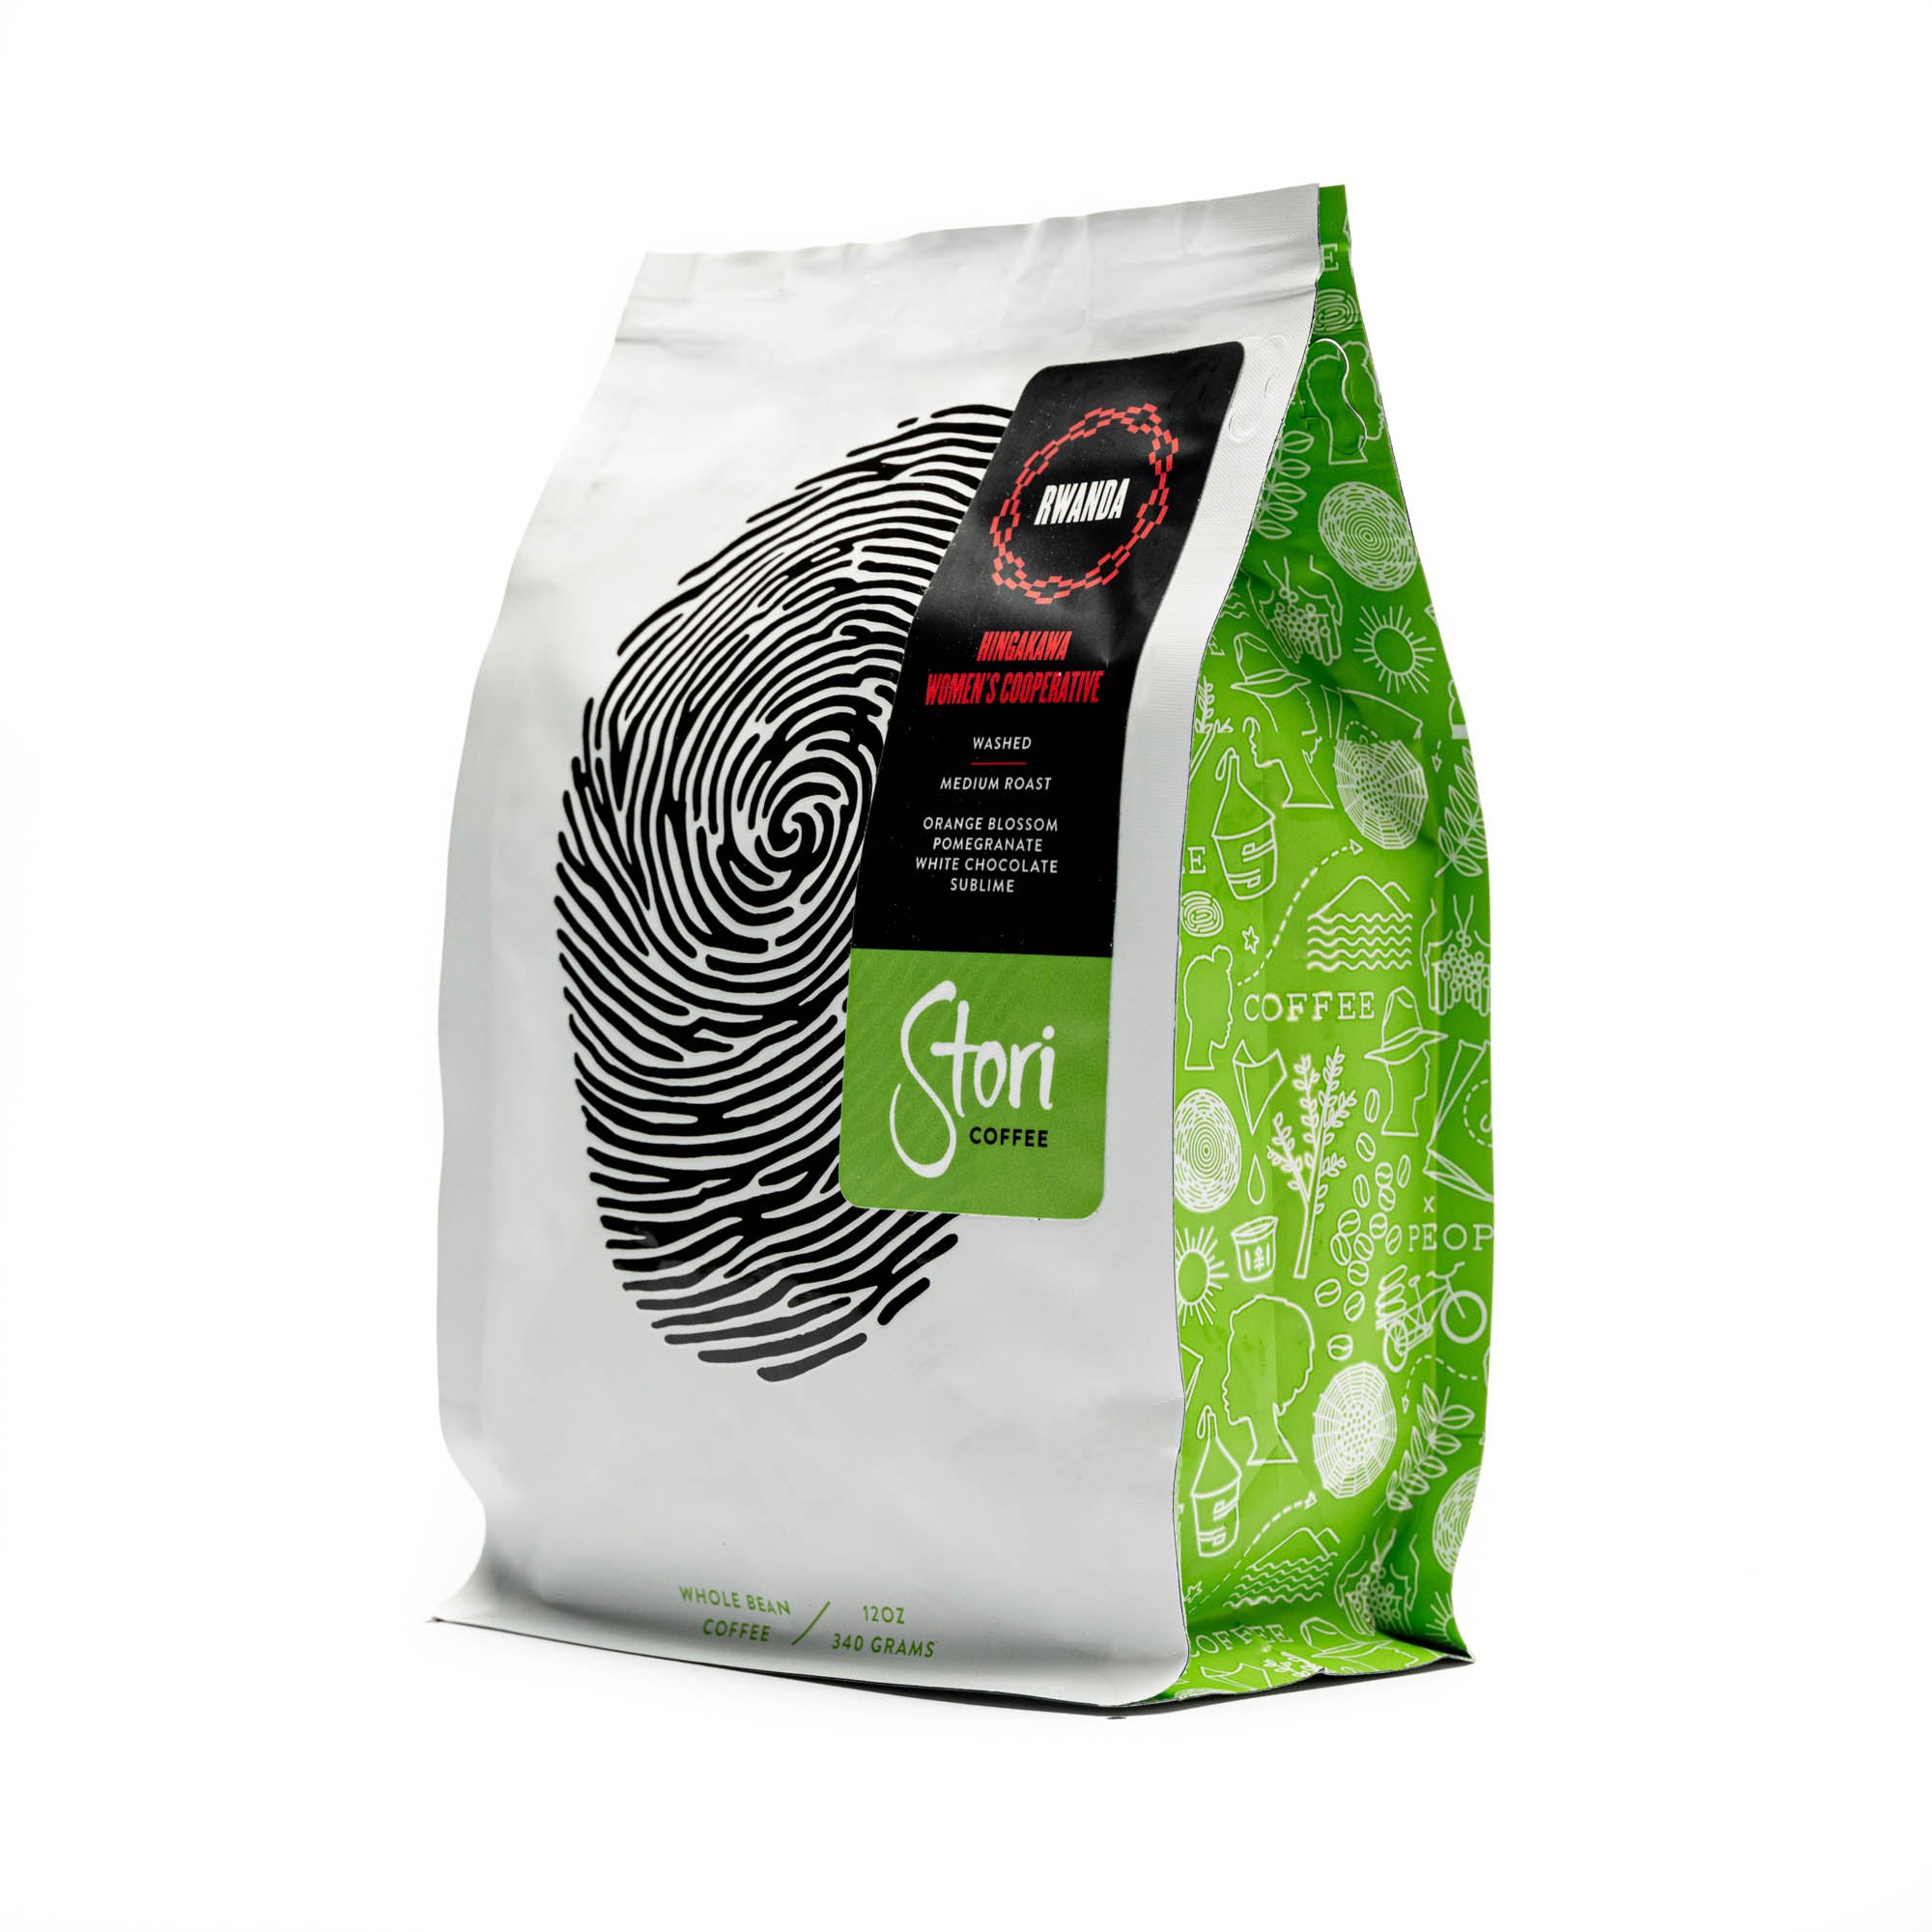 This picture shows an image of the side of our Single Origin Rwanda Coffee Bag. The bag is white with a black thumb print to symbolize our global connection. On the side are illustrations of the ways that coffee connects us. 